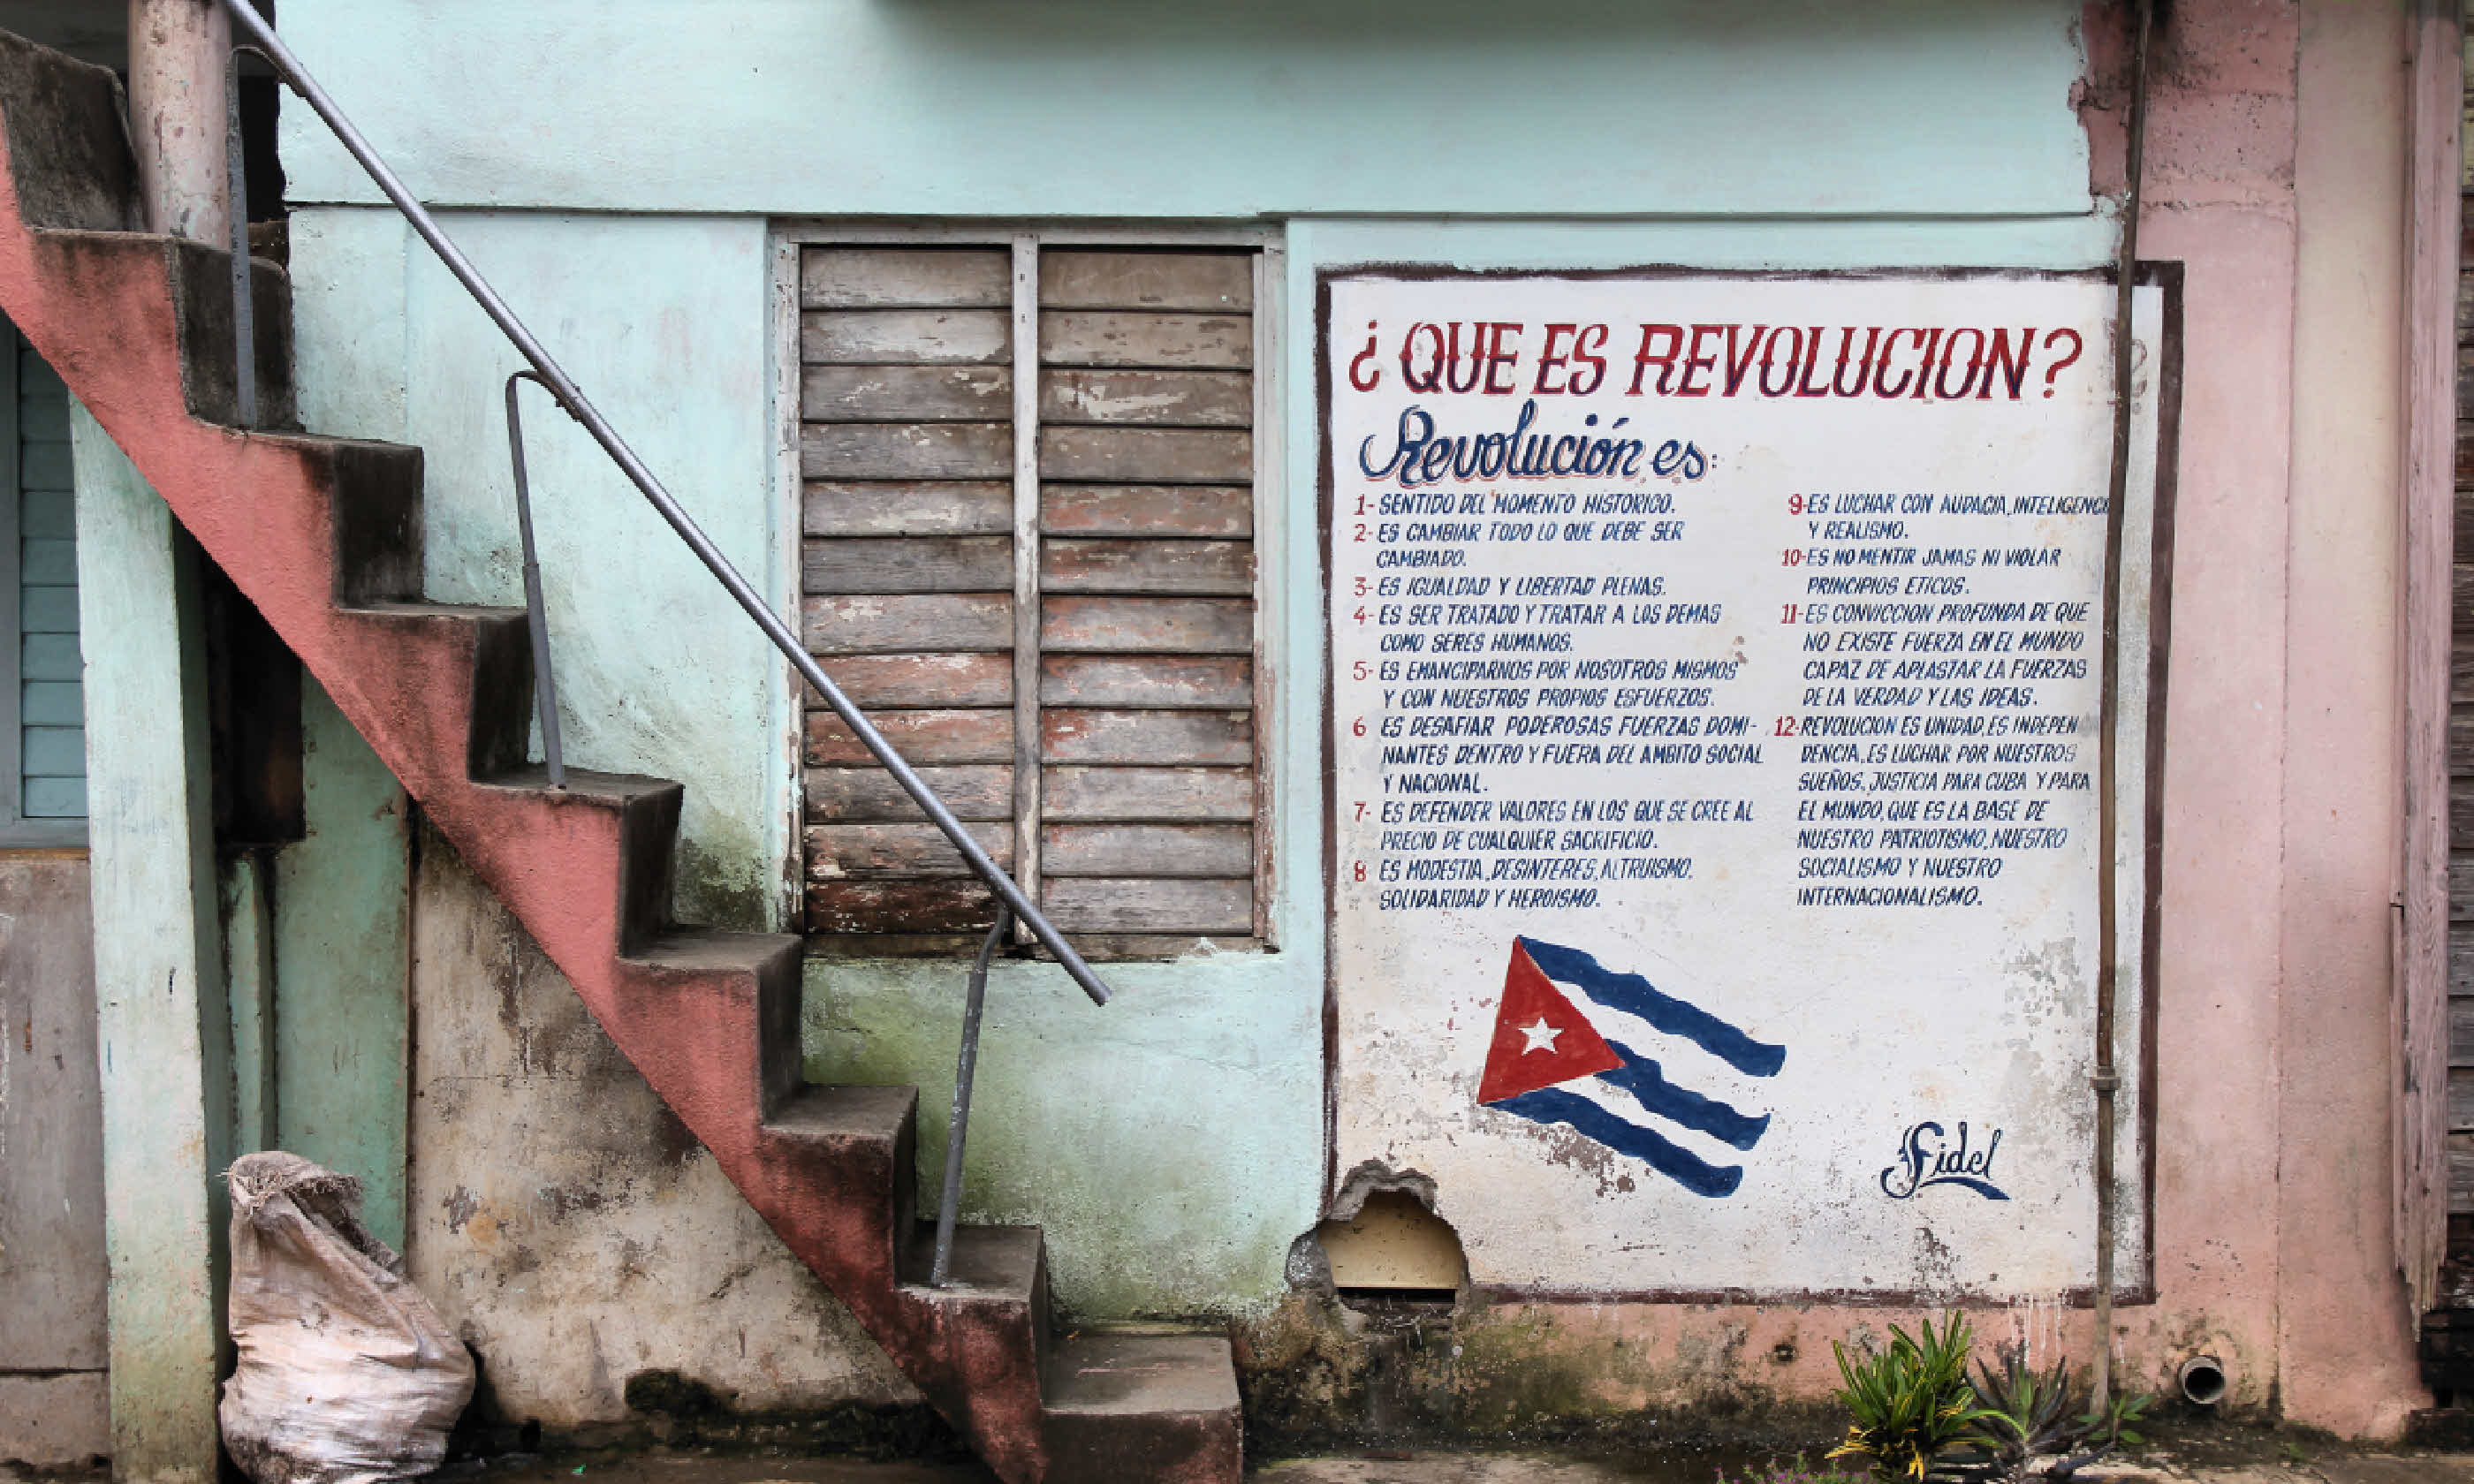 Wall mural celebrates Revolution and Socialism in Baracoa (Shutterstock: see credit below)